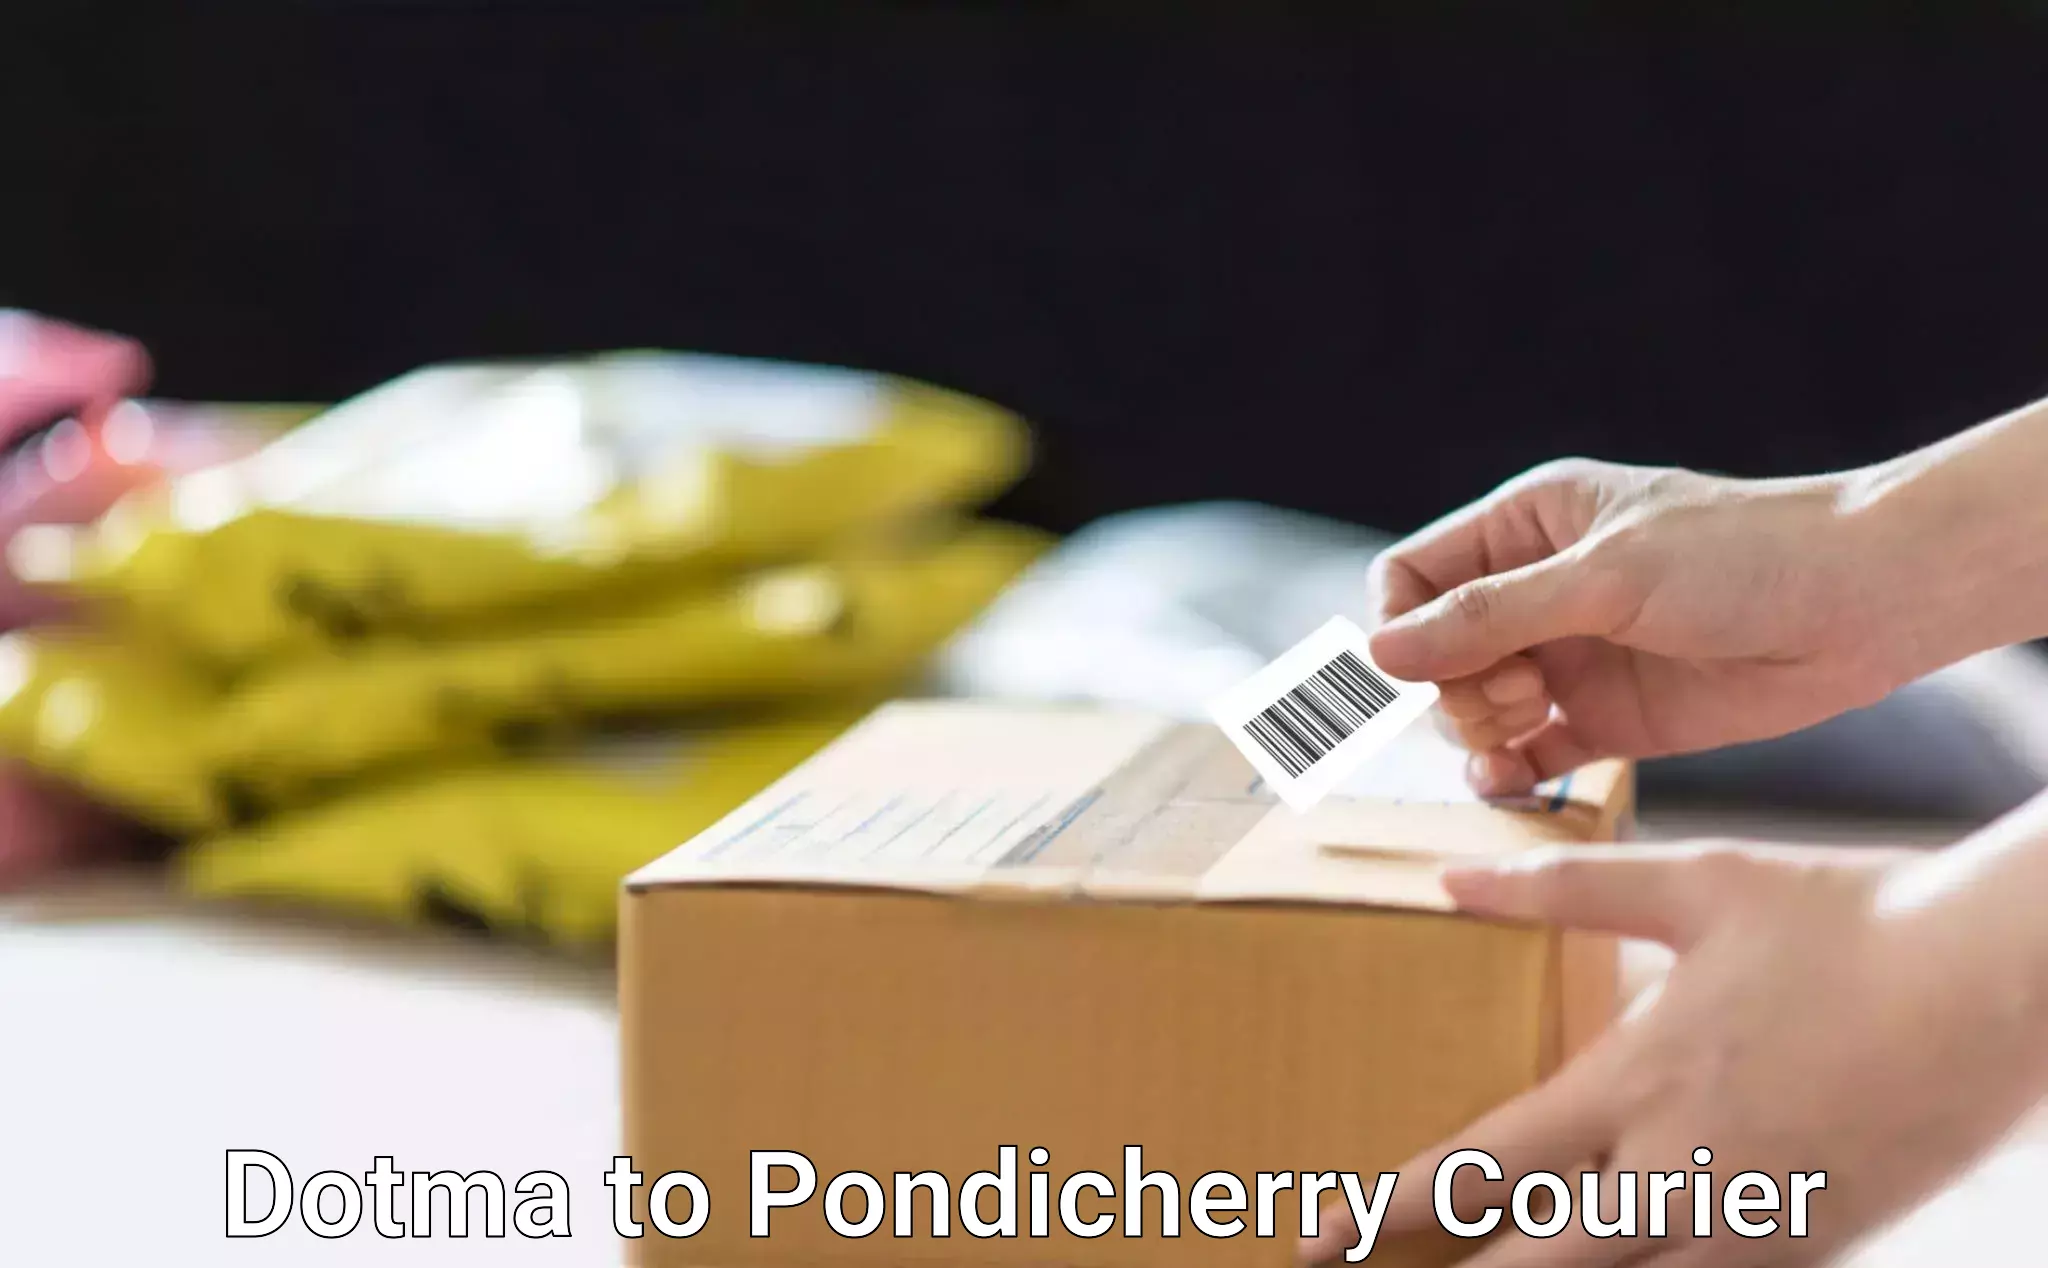 Reliable package handling Dotma to Pondicherry